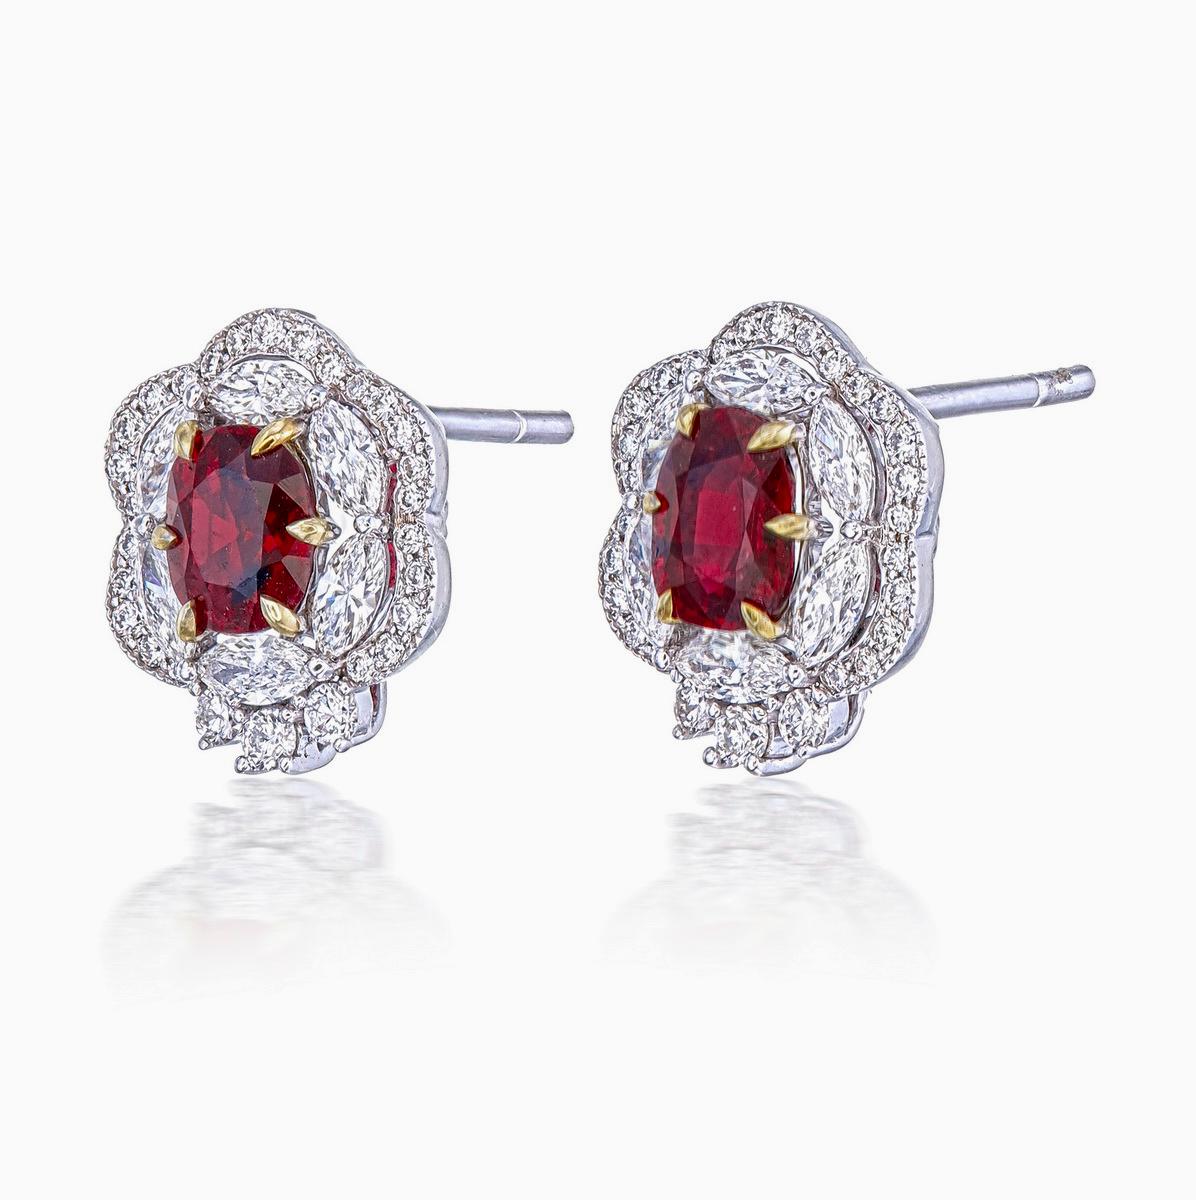 A pair of fine modern ruby and diamond earrings made in 18 Karat gold. This pair of earrings embraces minimalism with its simple floral design while still displaying elegance; a great fit for lifestyle wear.

- There are two center oval Pigeon Blood